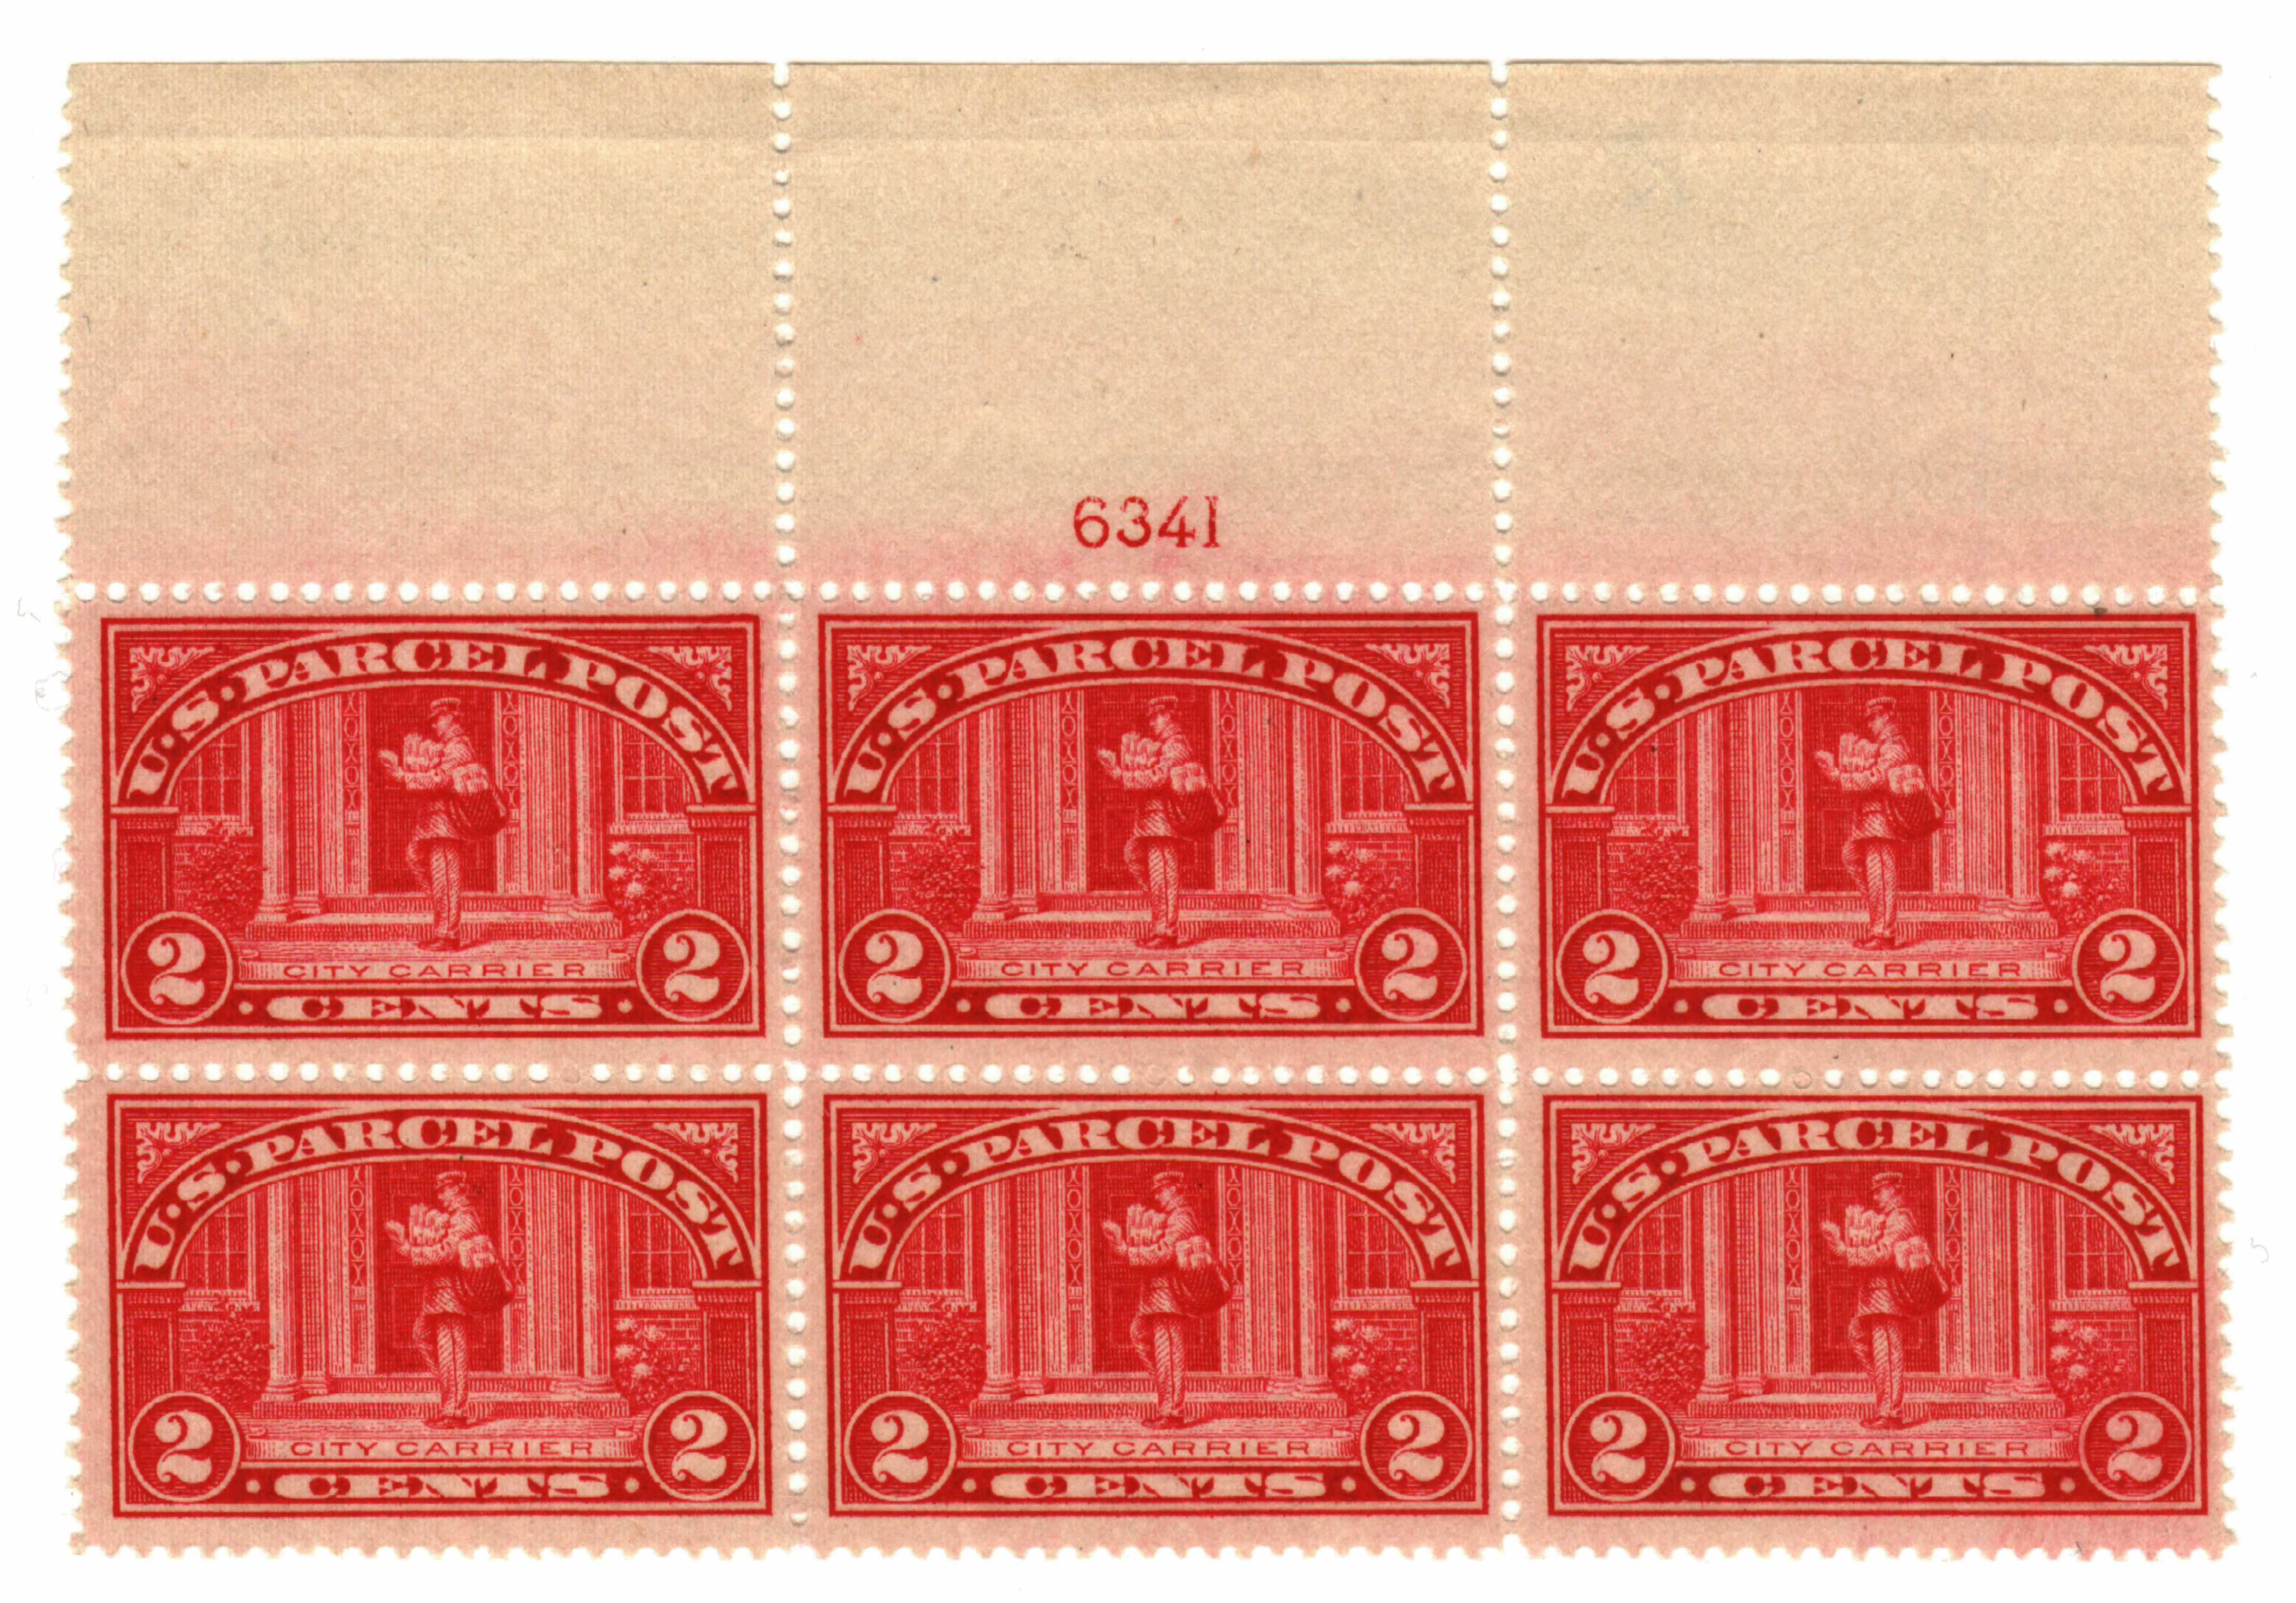 Q2 - 1913 2c Parcel Post Stamp - City Carrier - Mystic Stamp Company